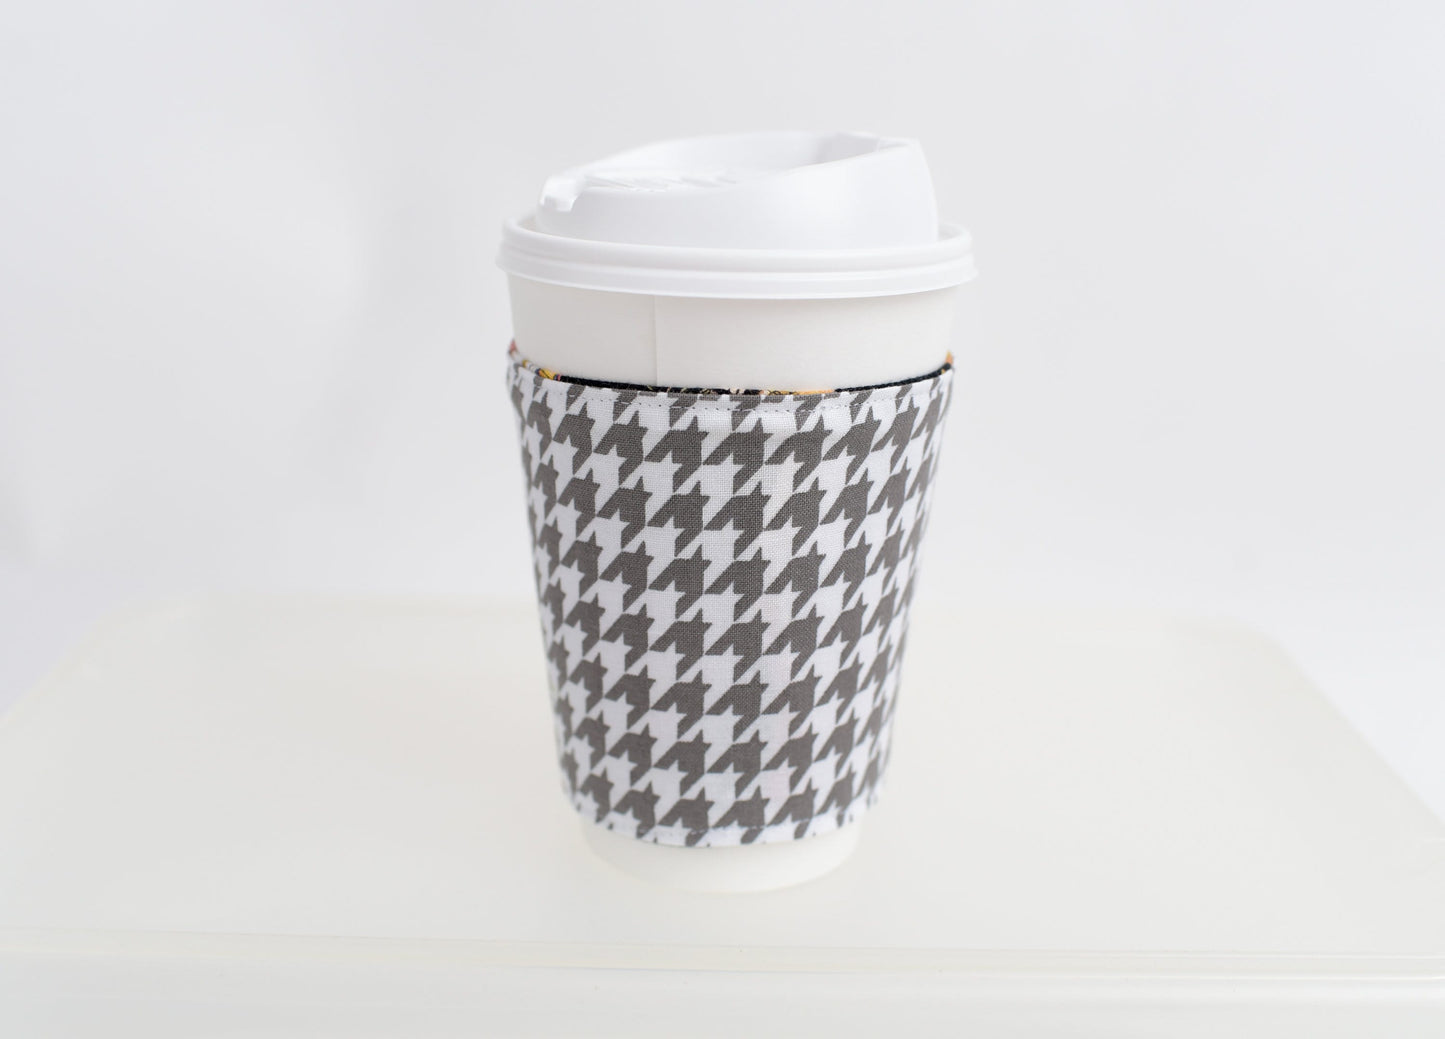 Black Fantasy and Gray Houndstooth Reversible Fabric Coffee Sleeve